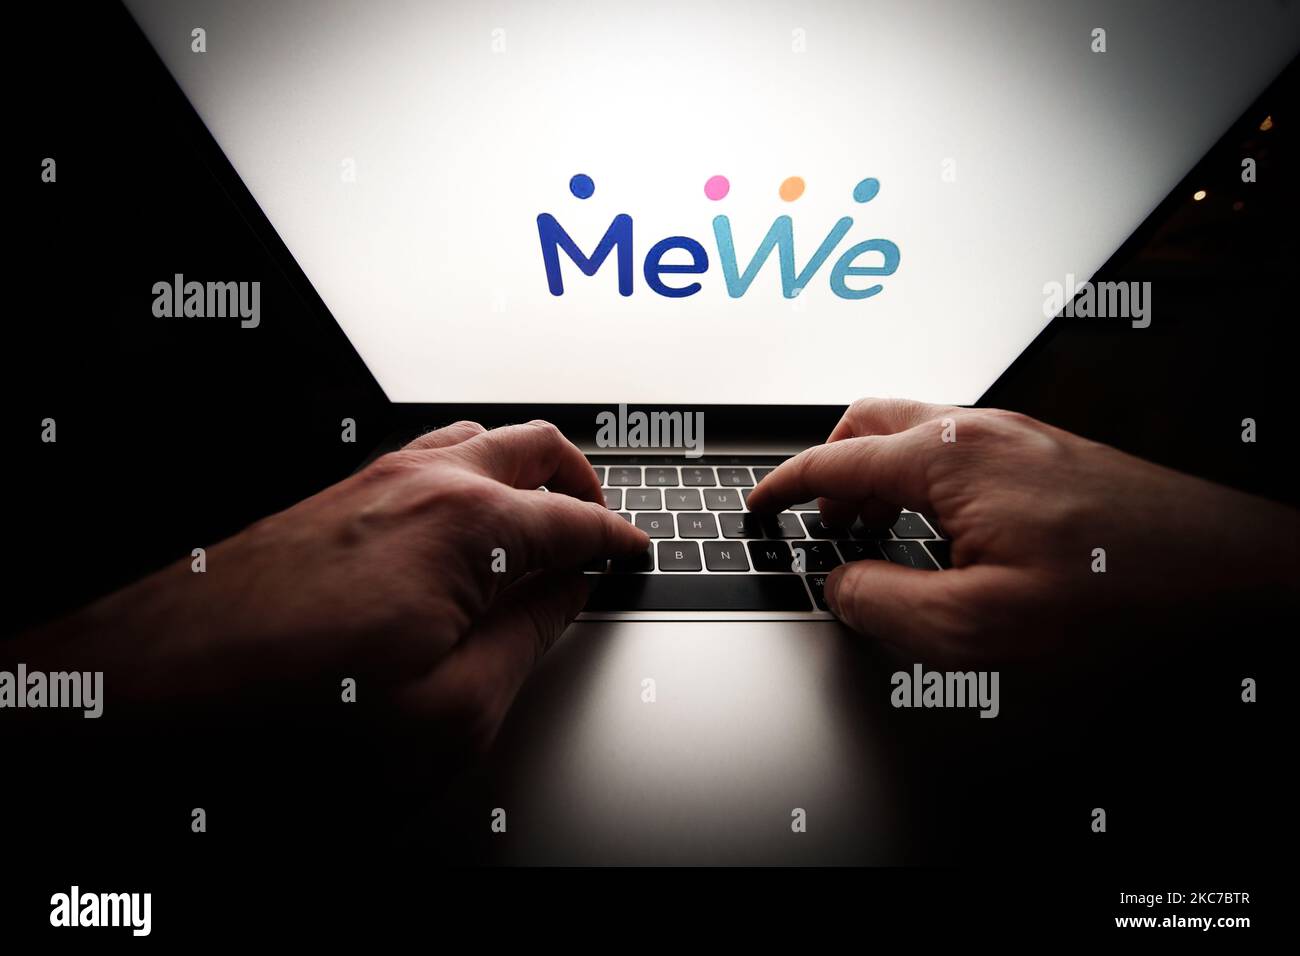 MeWe Network on the App Store